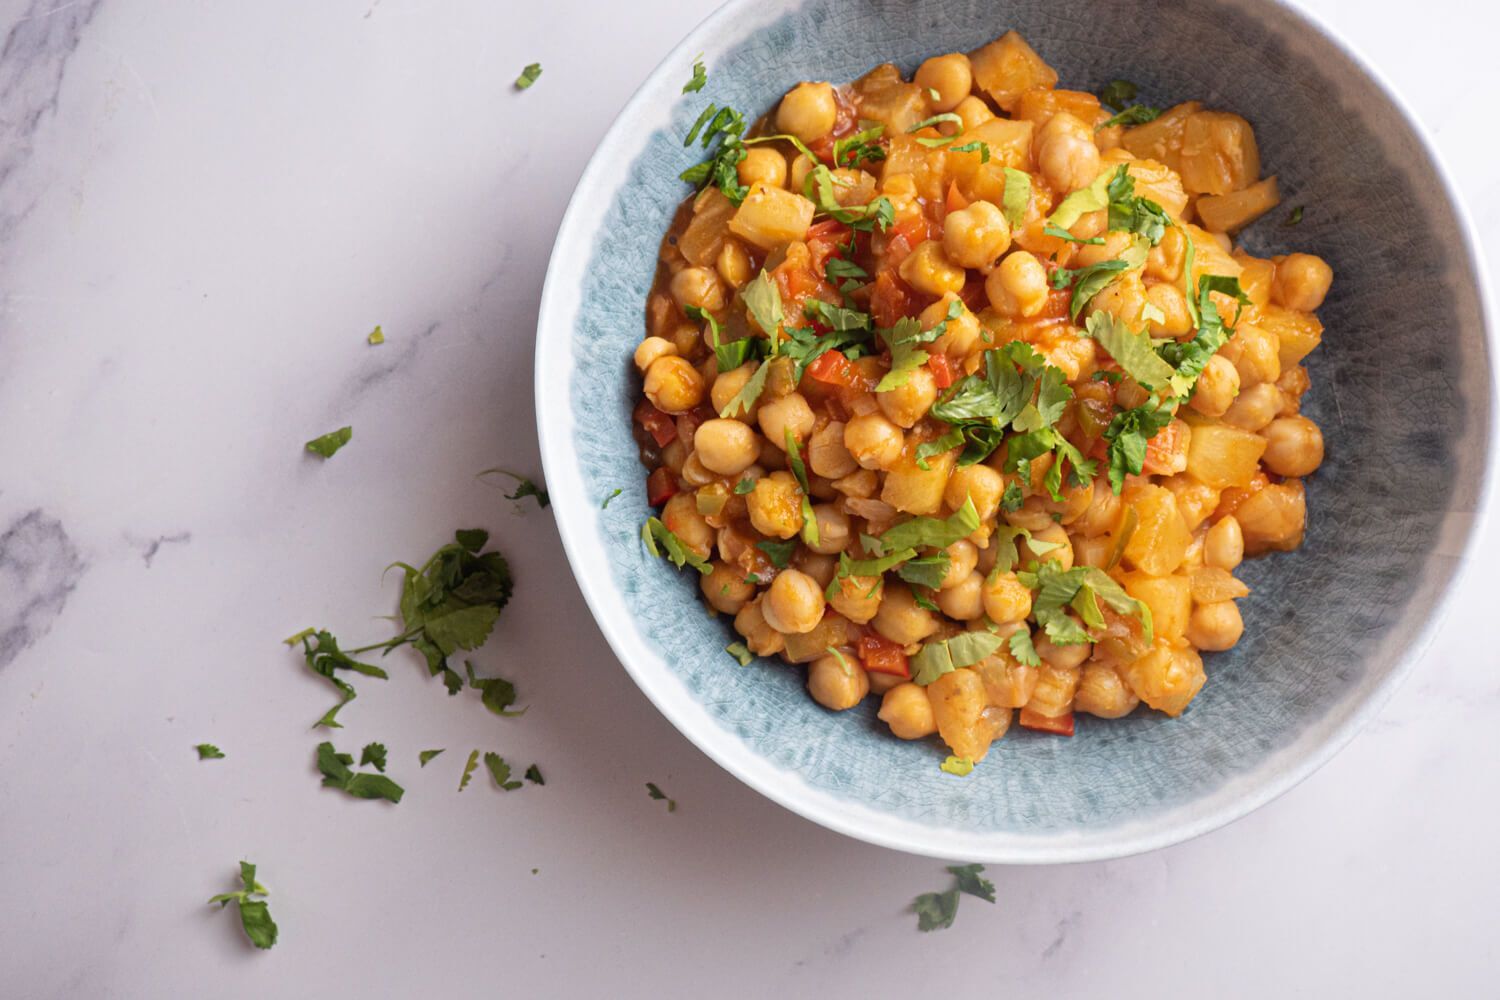 Slow cooker sweet and sour chickpeas with pineapple, red pepper, and cilantro in a bowl.